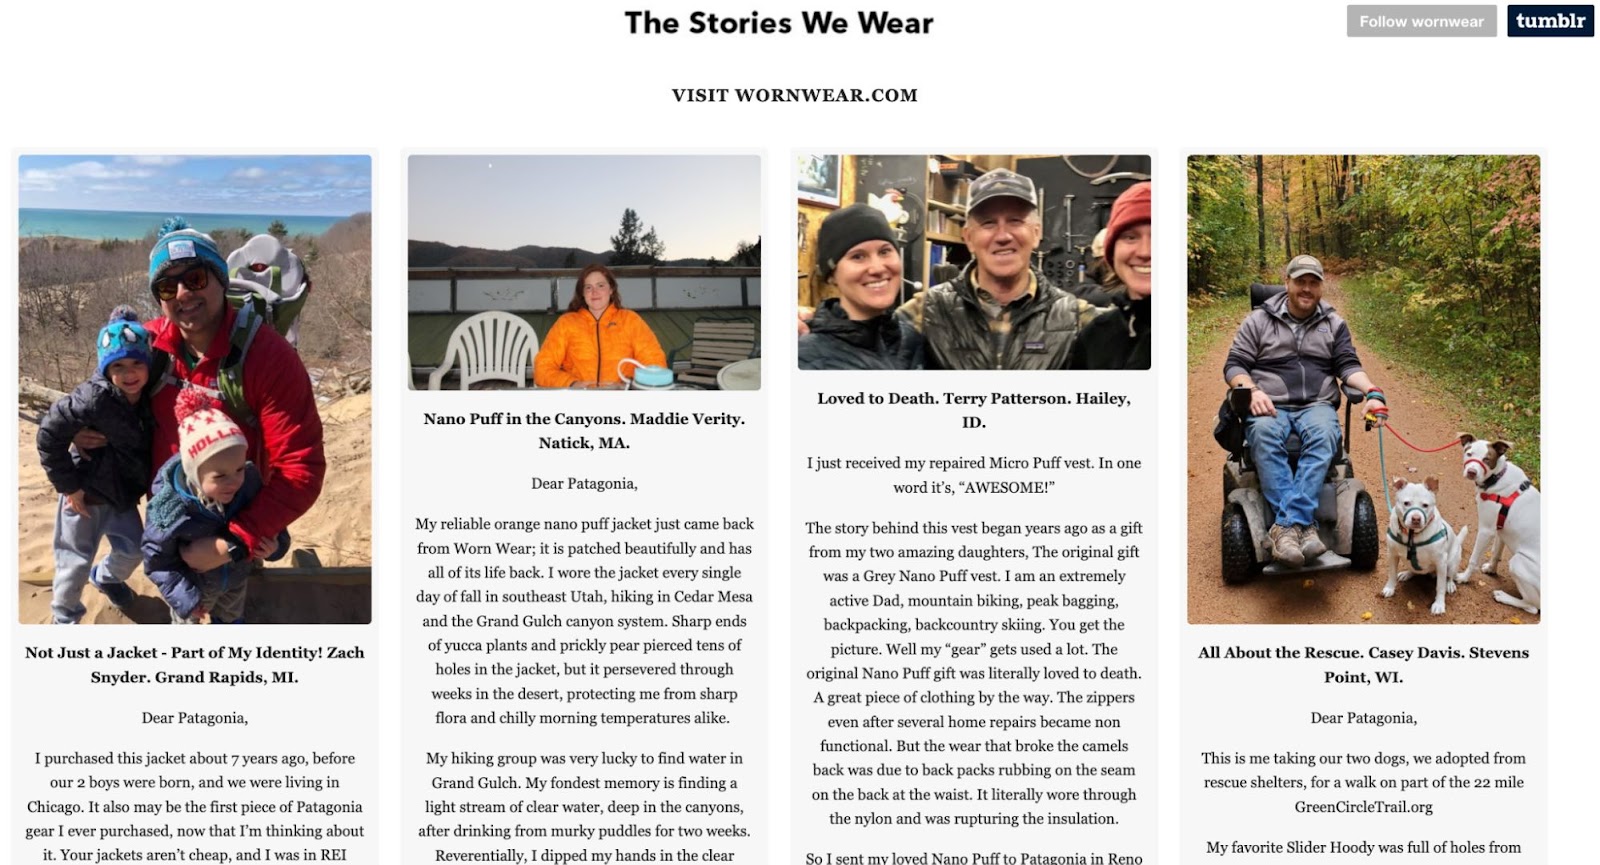 "The Stories We Wear" section of Patagonia's site